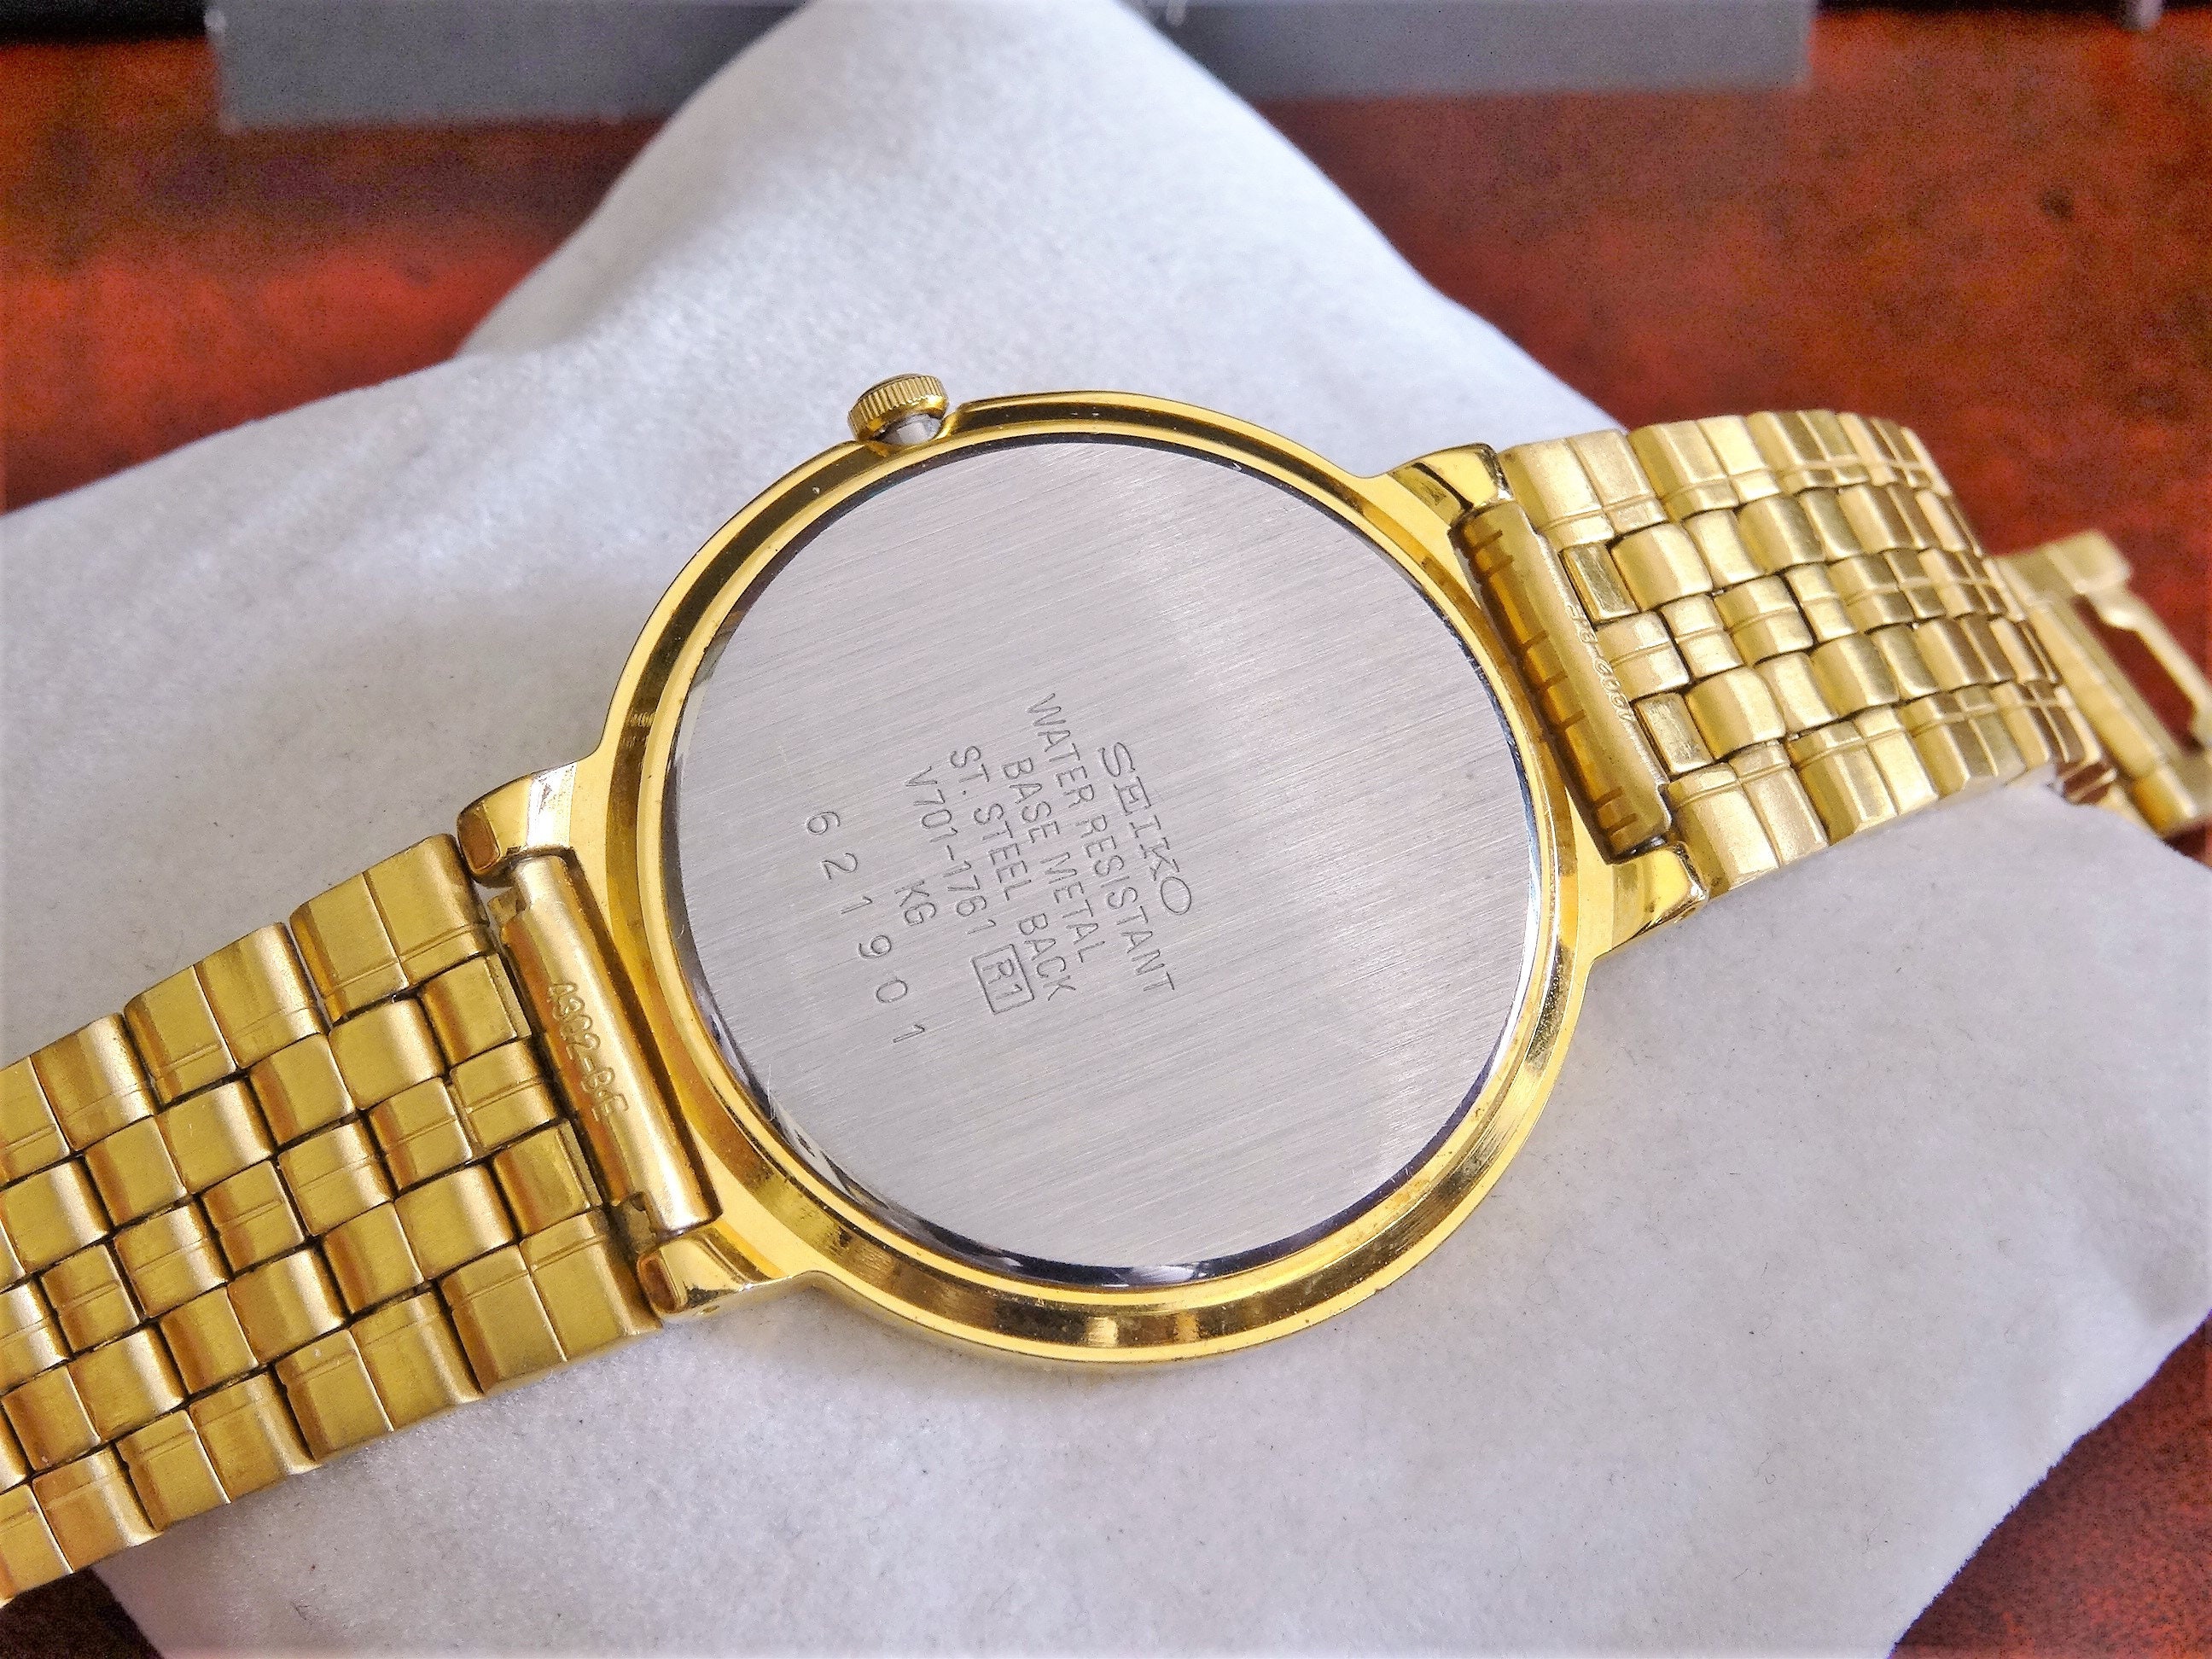 1995 Seiko Gold Tone Water Resistant Men's Watch W/ 18mm - Etsy